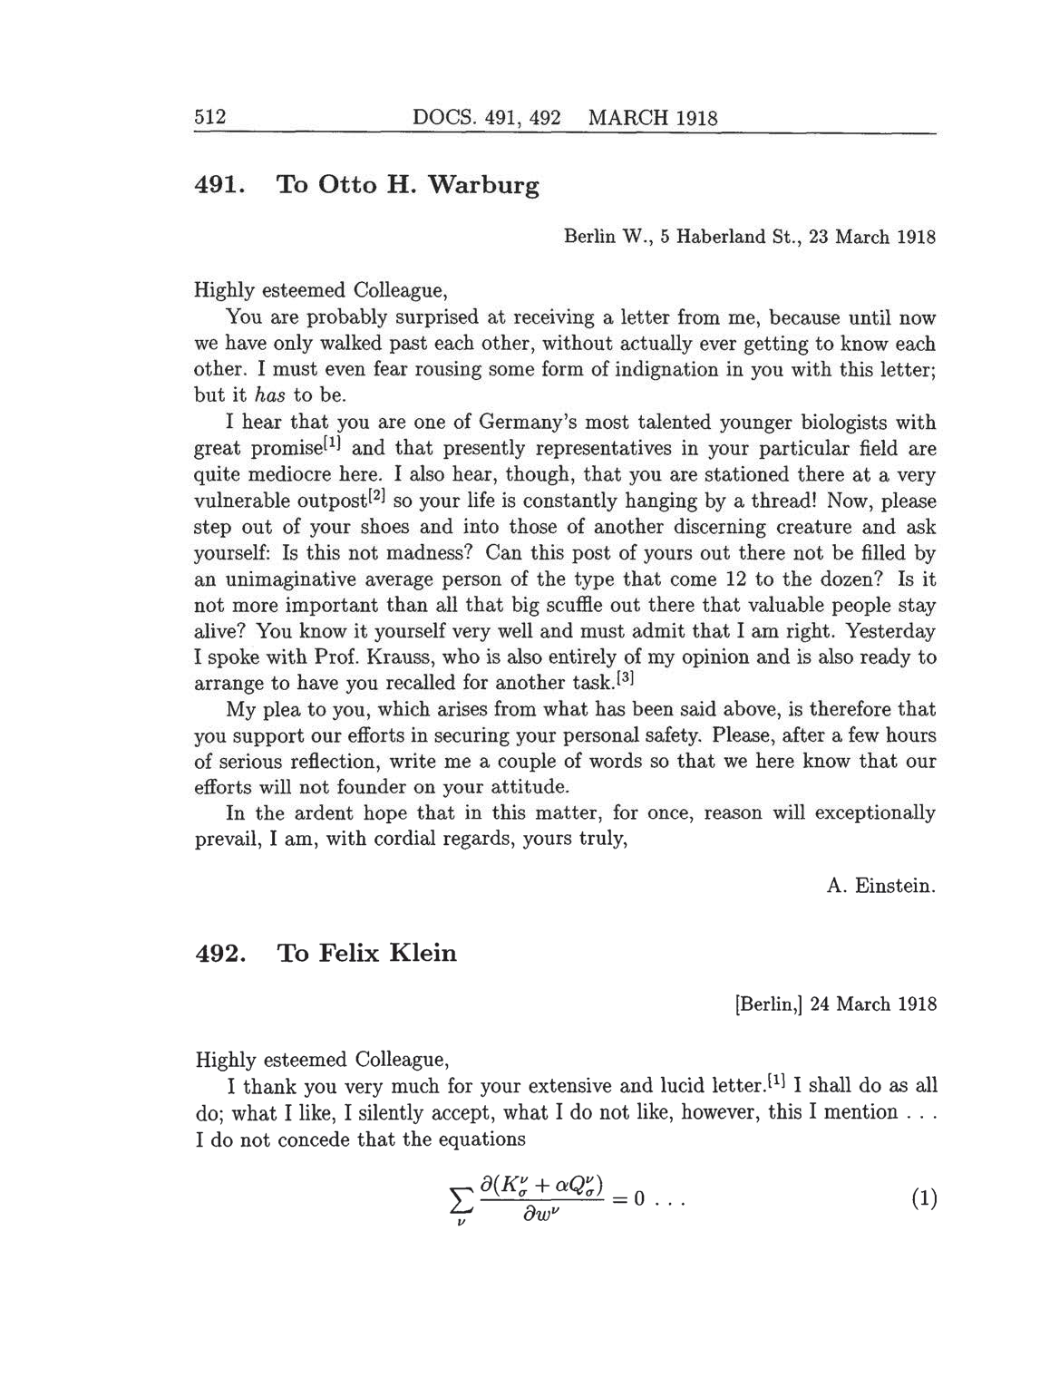 Volume 8: The Berlin Years: Correspondence, 1914-1918 (English translation supplement) page 512